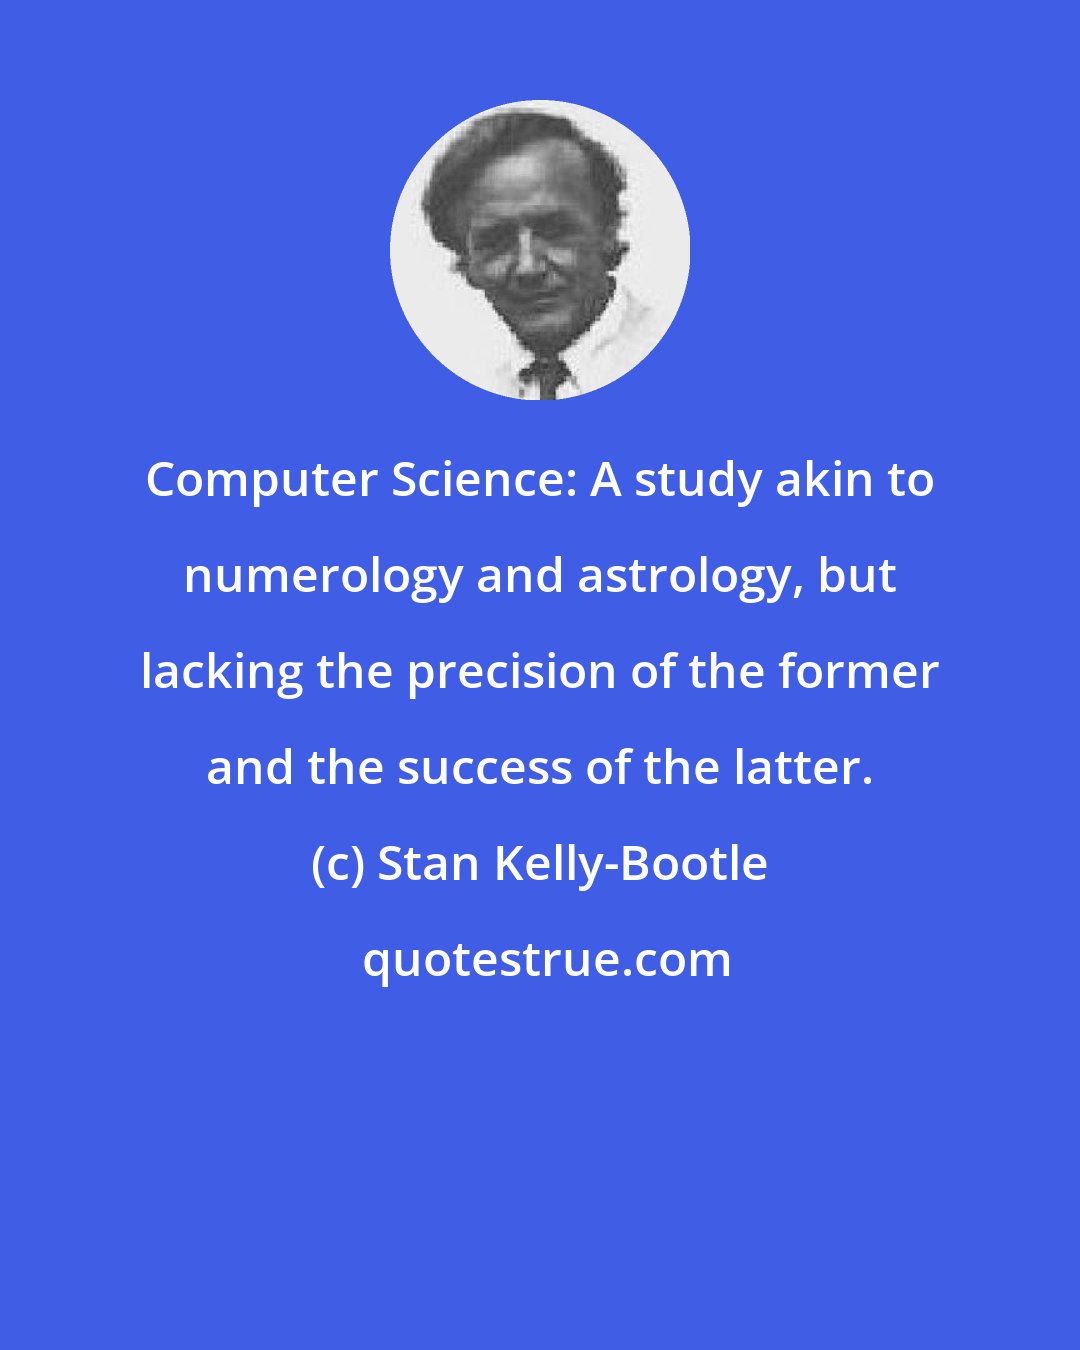 Stan Kelly-Bootle: Computer Science: A study akin to numerology and astrology, but lacking the precision of the former and the success of the latter.